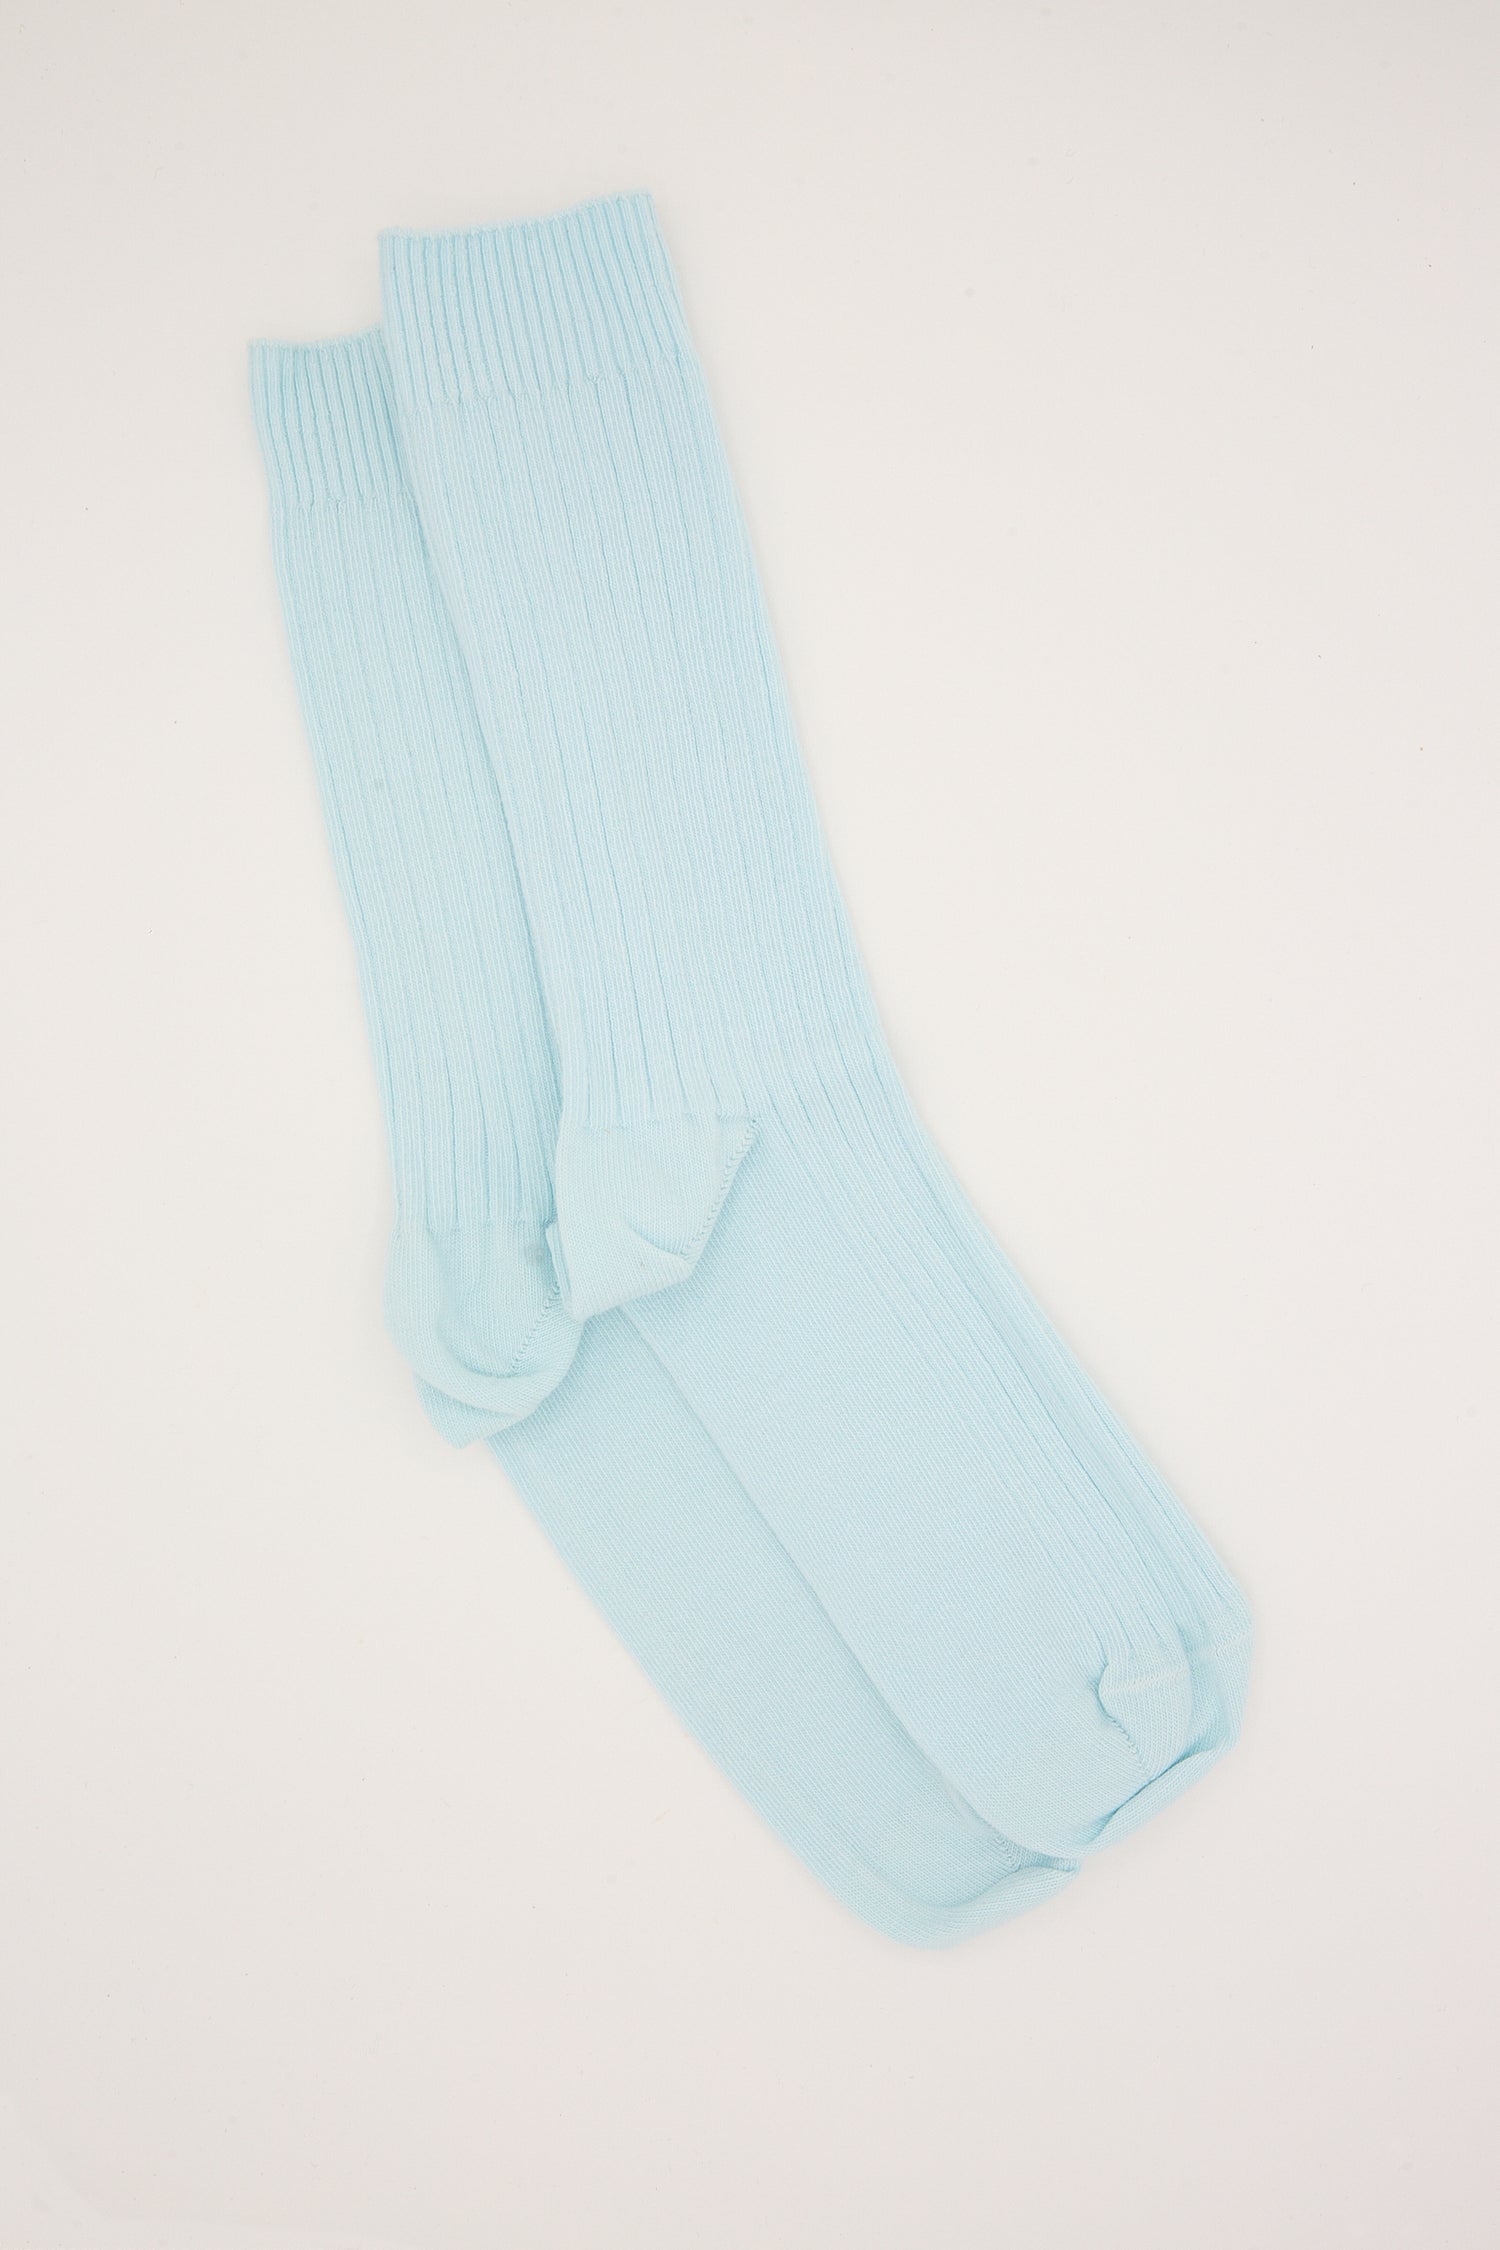 A pair of light blue knee-high Baserange socks, made from organic cotton, laid flat on a white background.